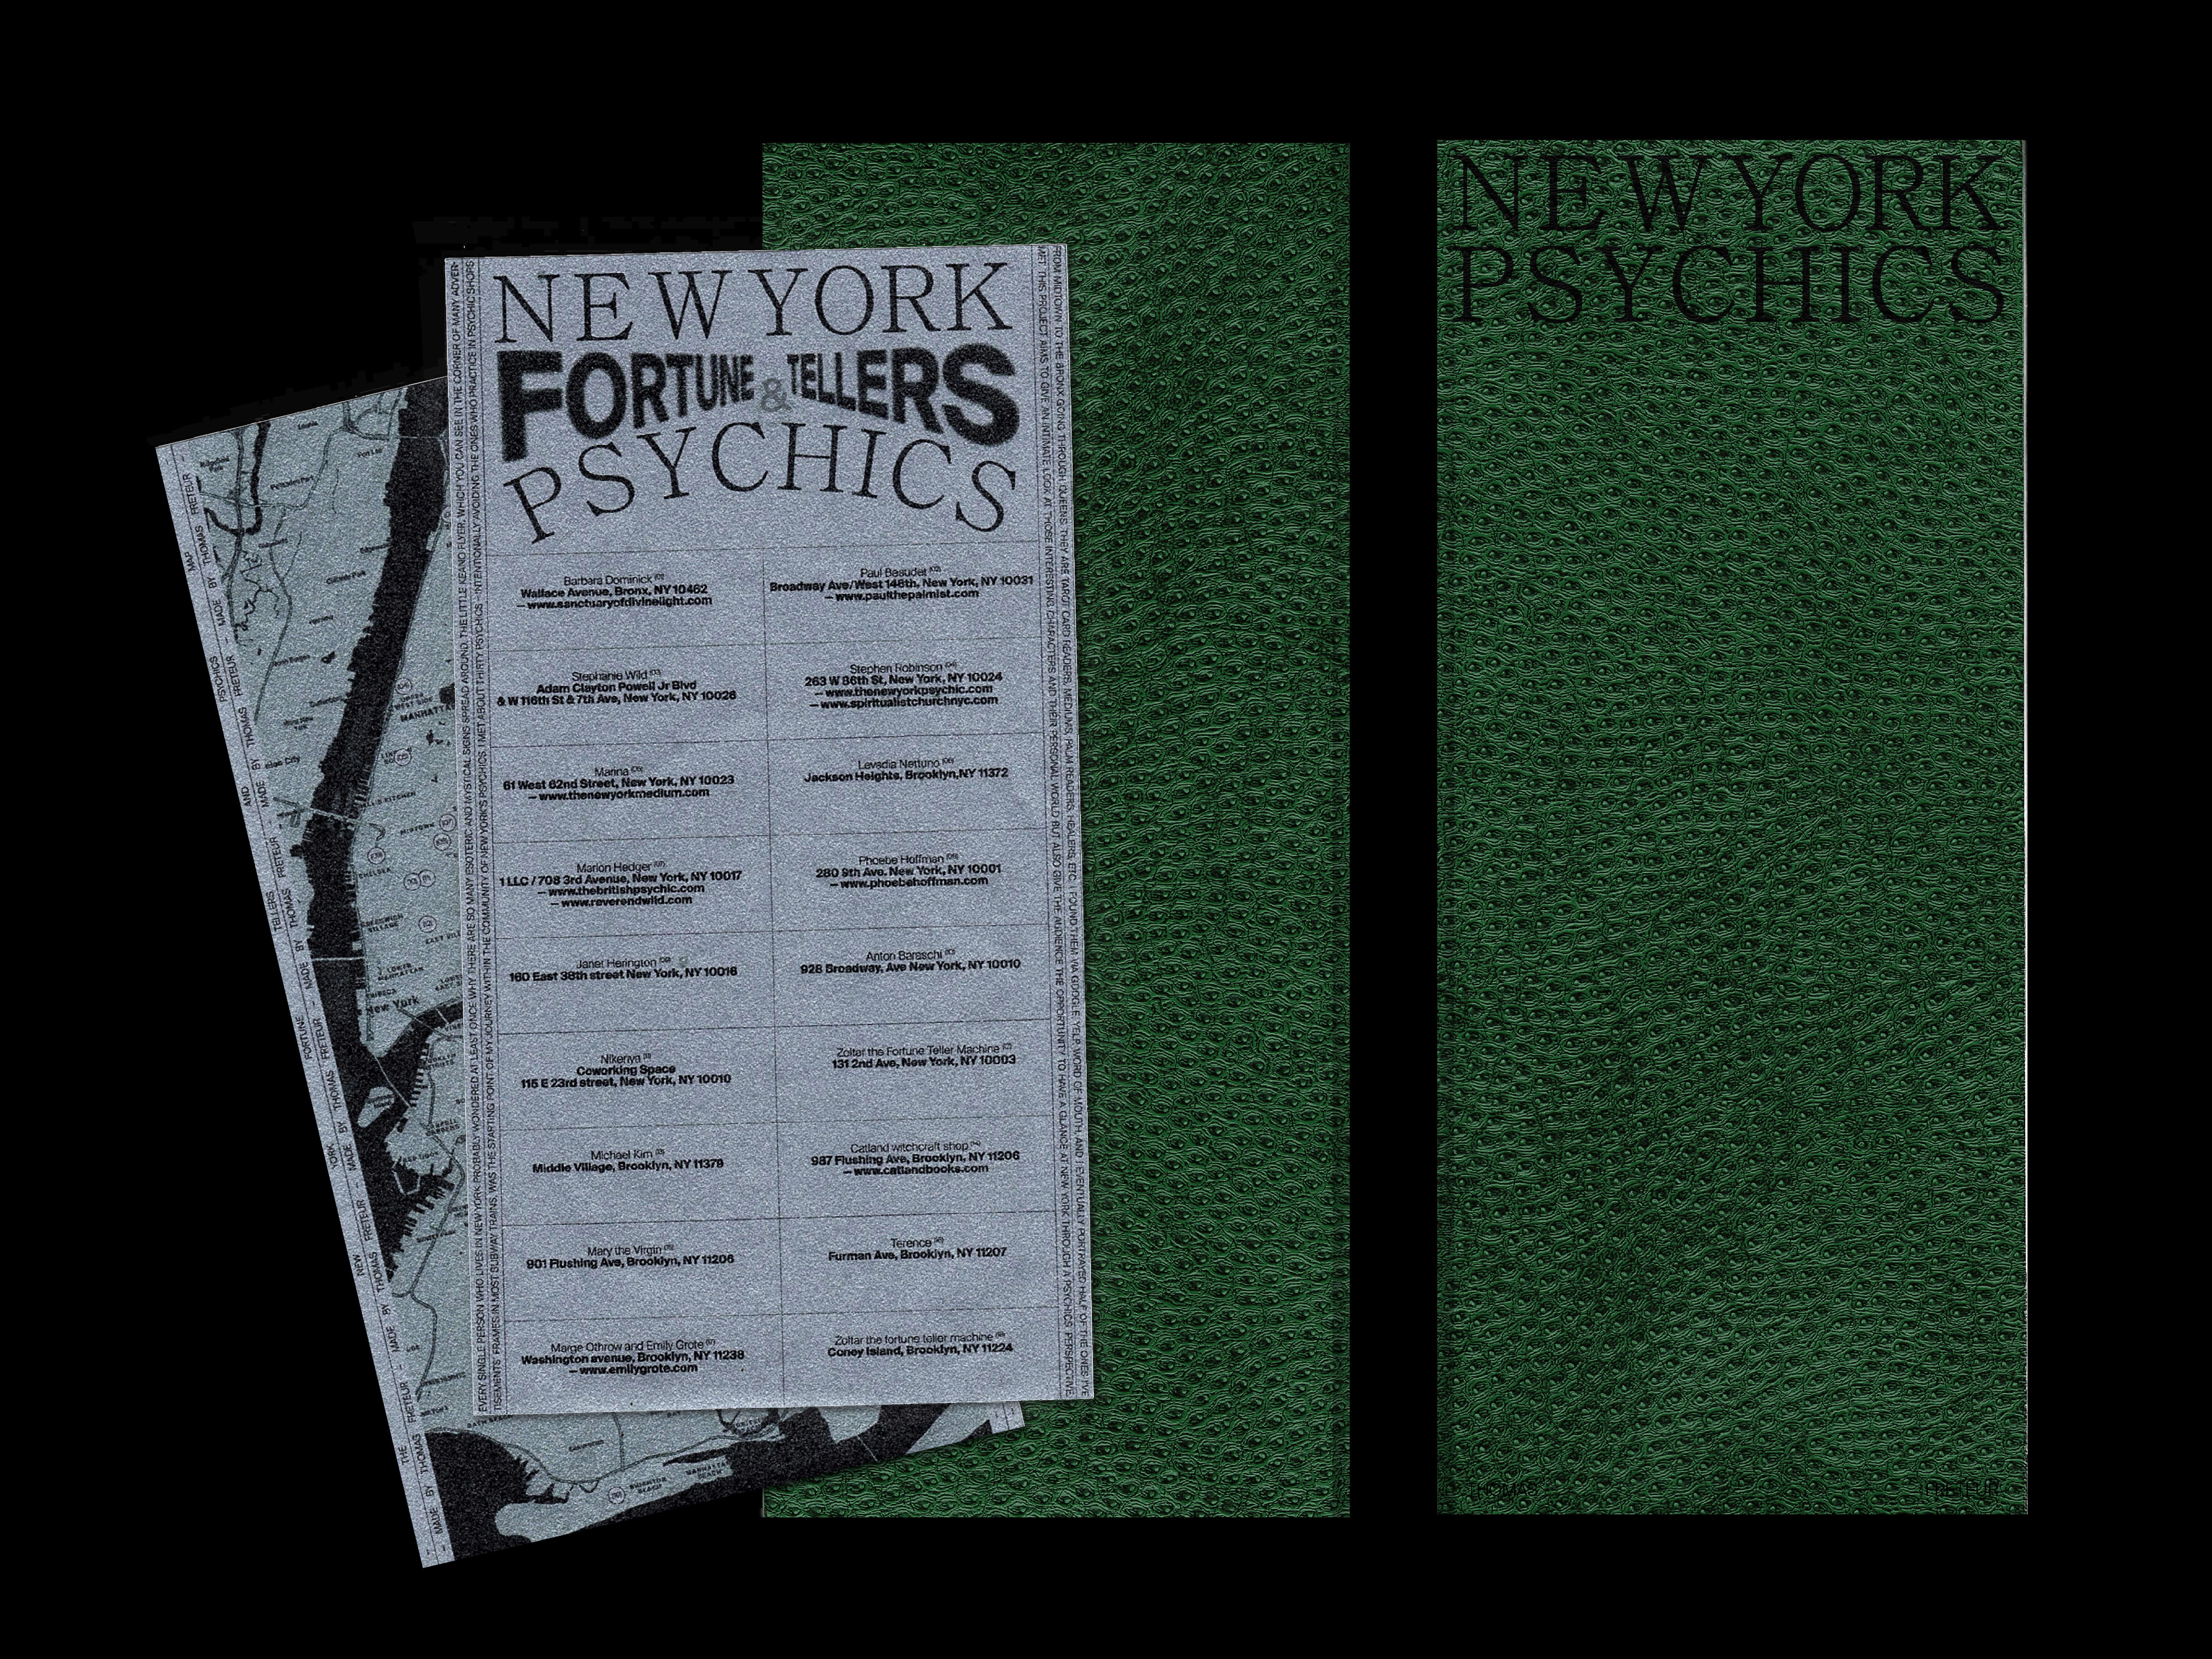 http://julienbaiamonte.com/content/1-projects/new-york-psychics/nyc_psychics_scan001_baiamonte_251019.png